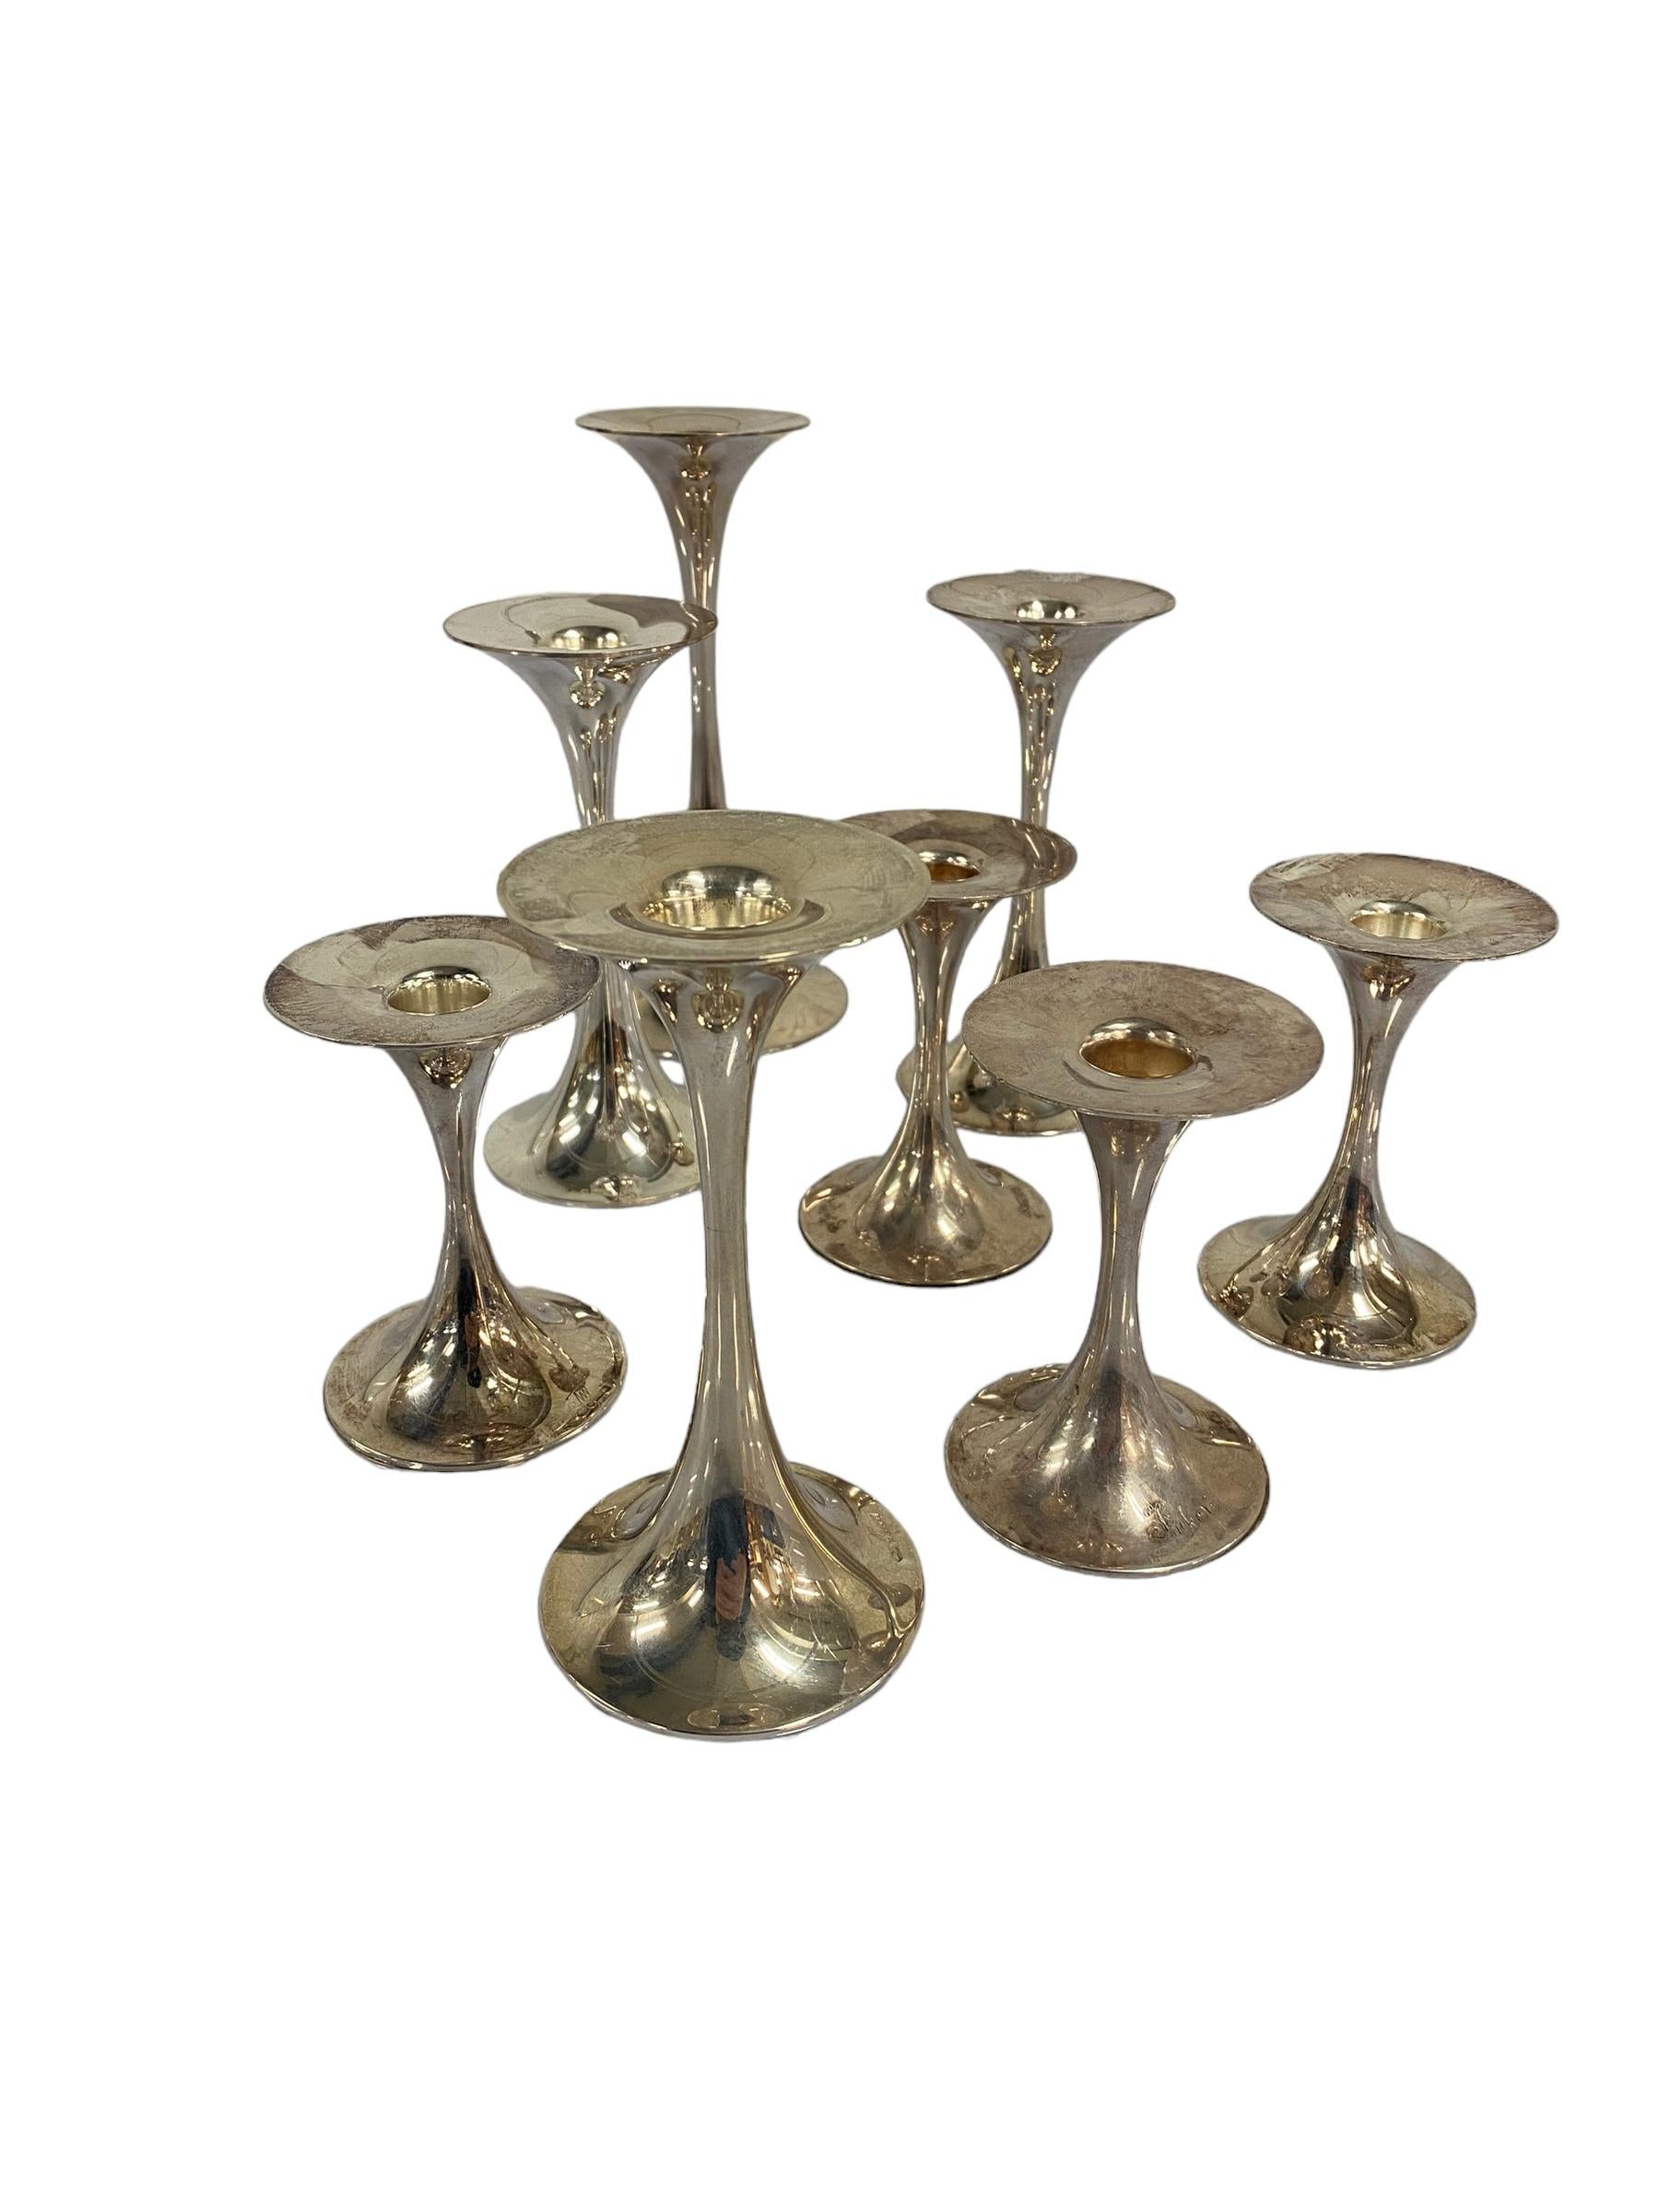 A set of candle holders designed by Tapio Wirkkala, and manufactured by Kultakeskus Oy back in the 1980s. All pieces are authentic and come with a plethera of stamps and markings, confirming the year of manufacture and the manufacturer. 

Tapio